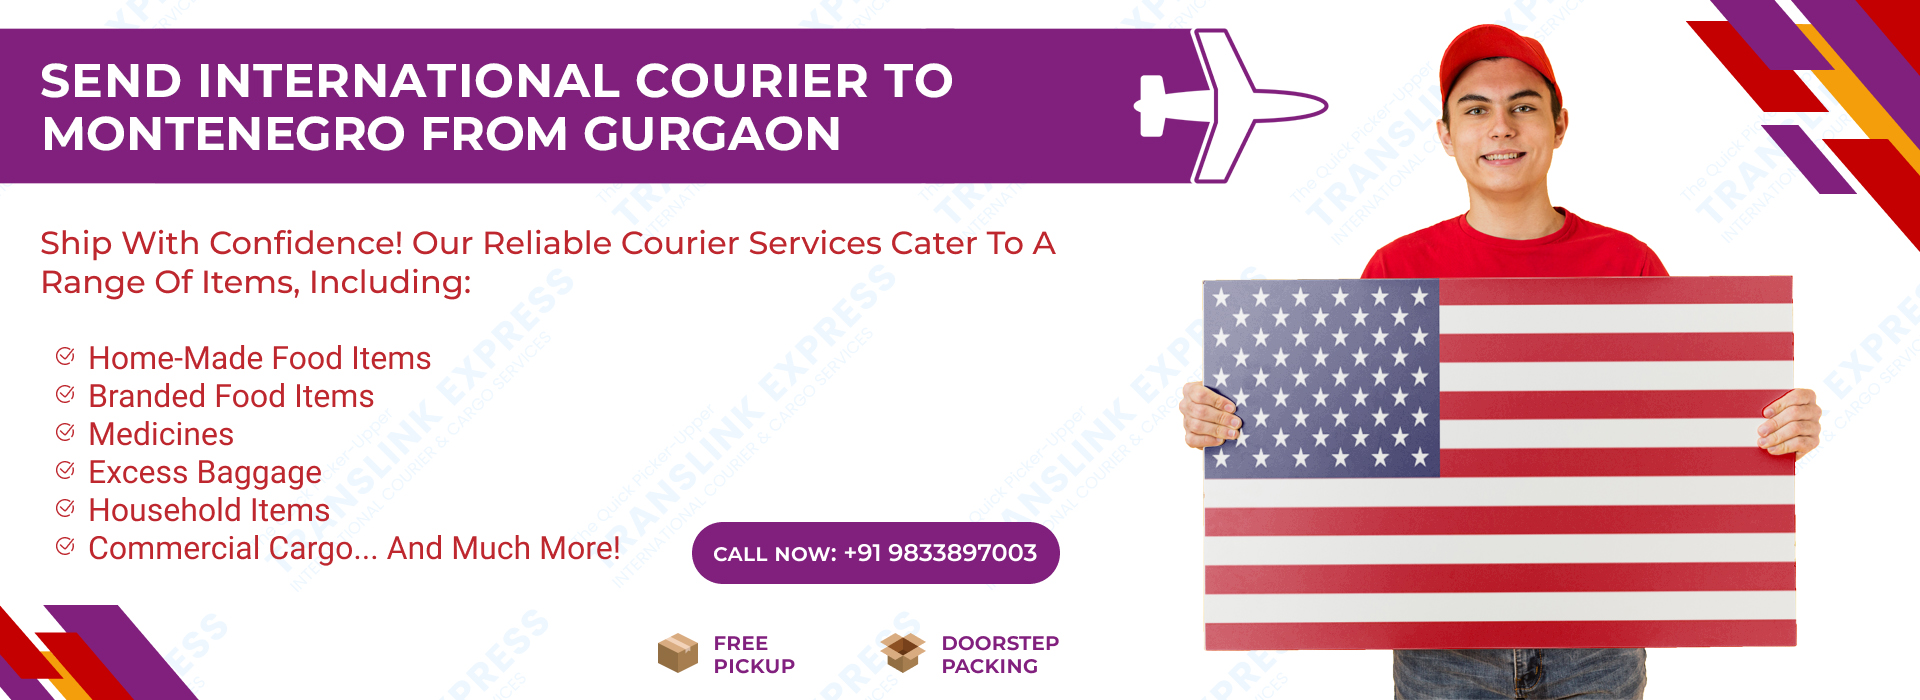 Courier to Montenegro From Gurgaon